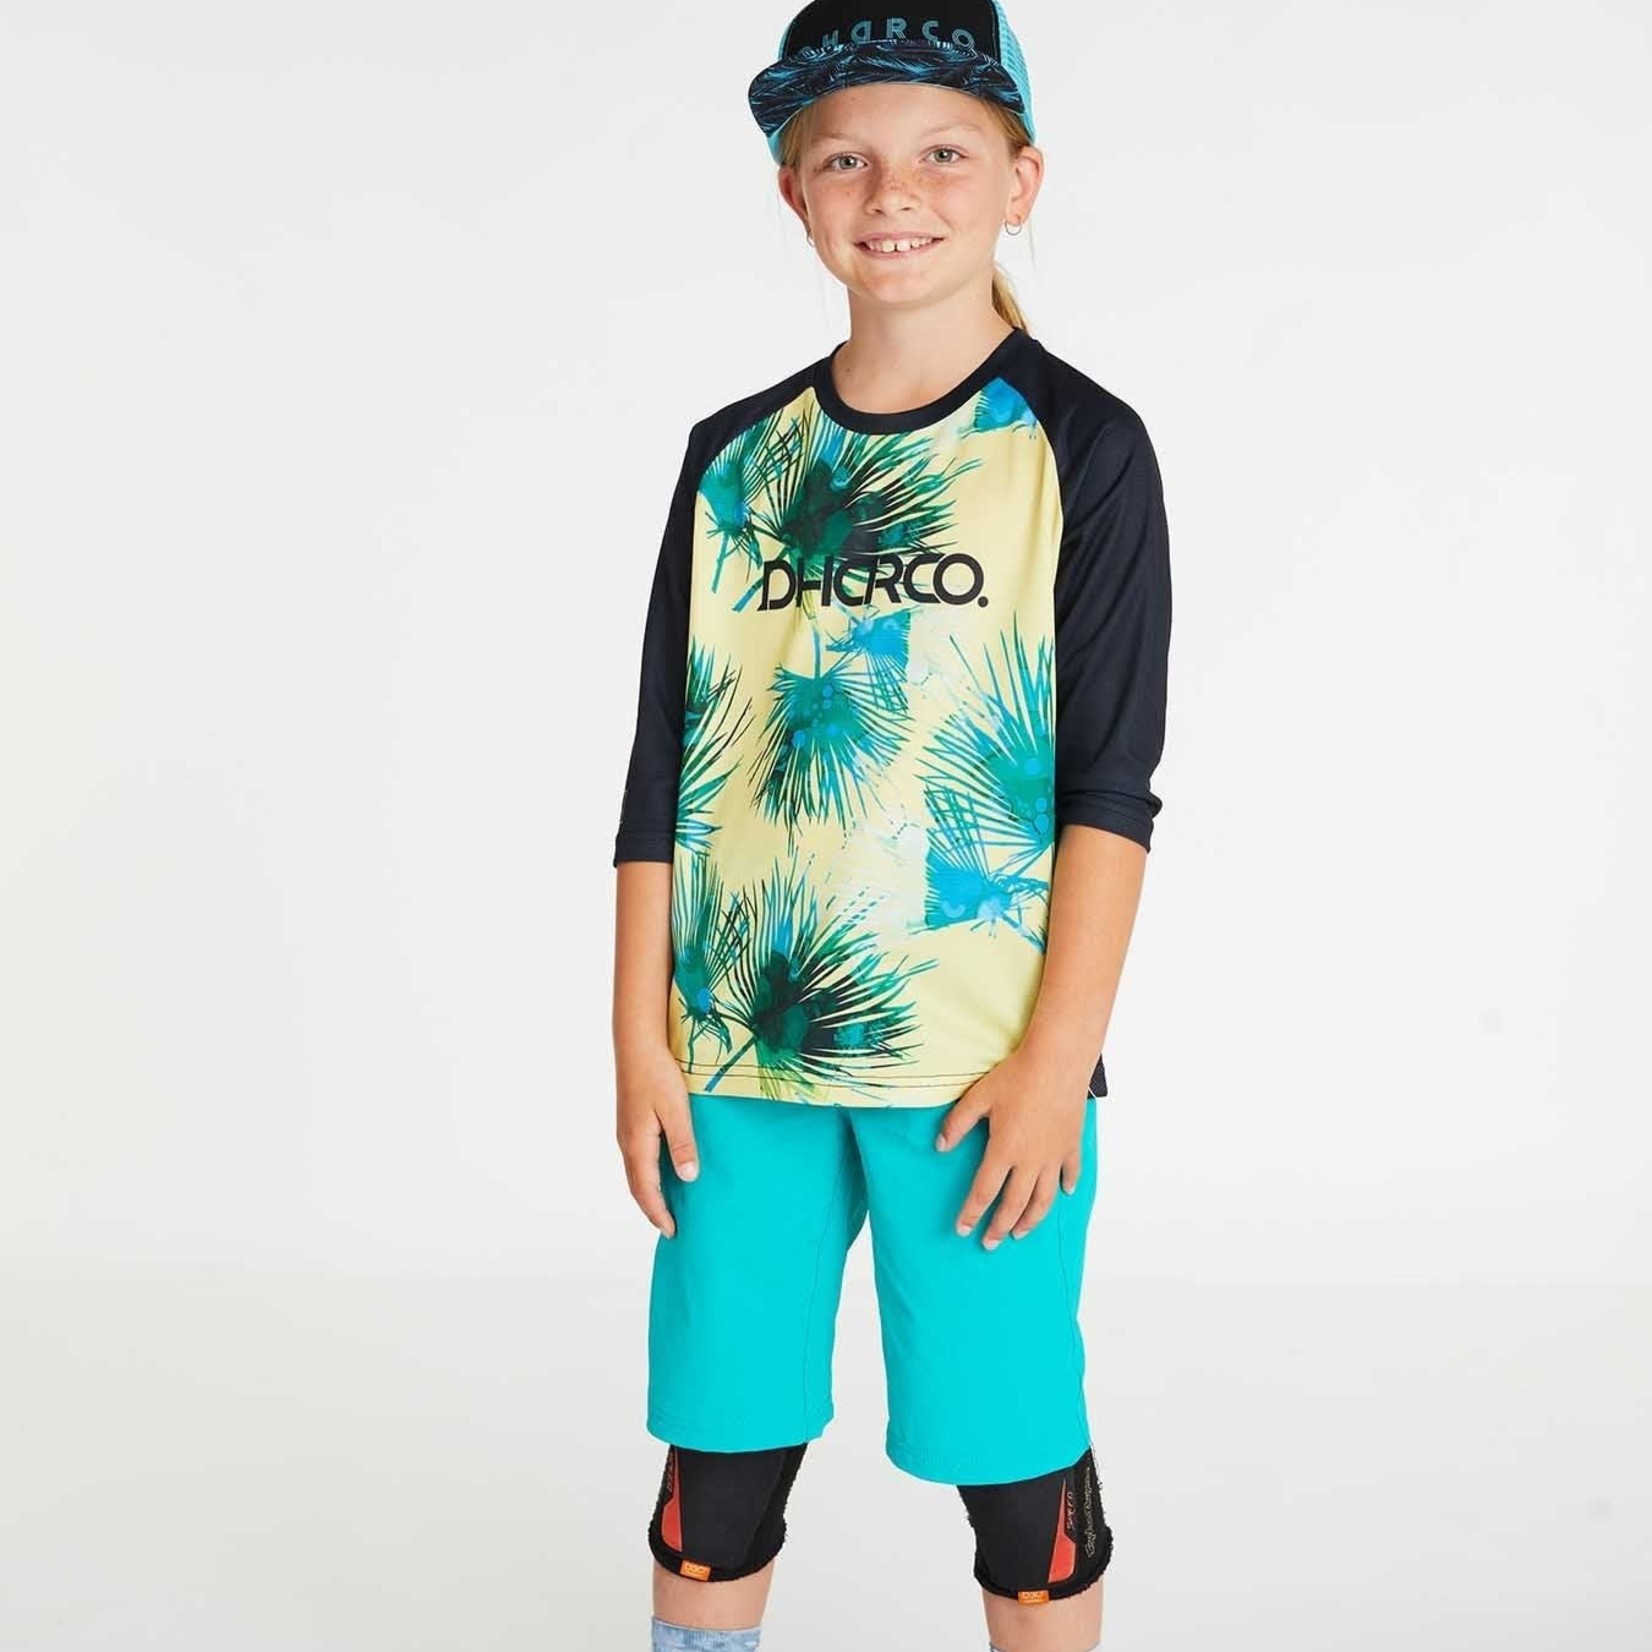 DHaRCO DHaRCO Youth 3/4 Sleeve Jersey Pineapple Express YXL / 12